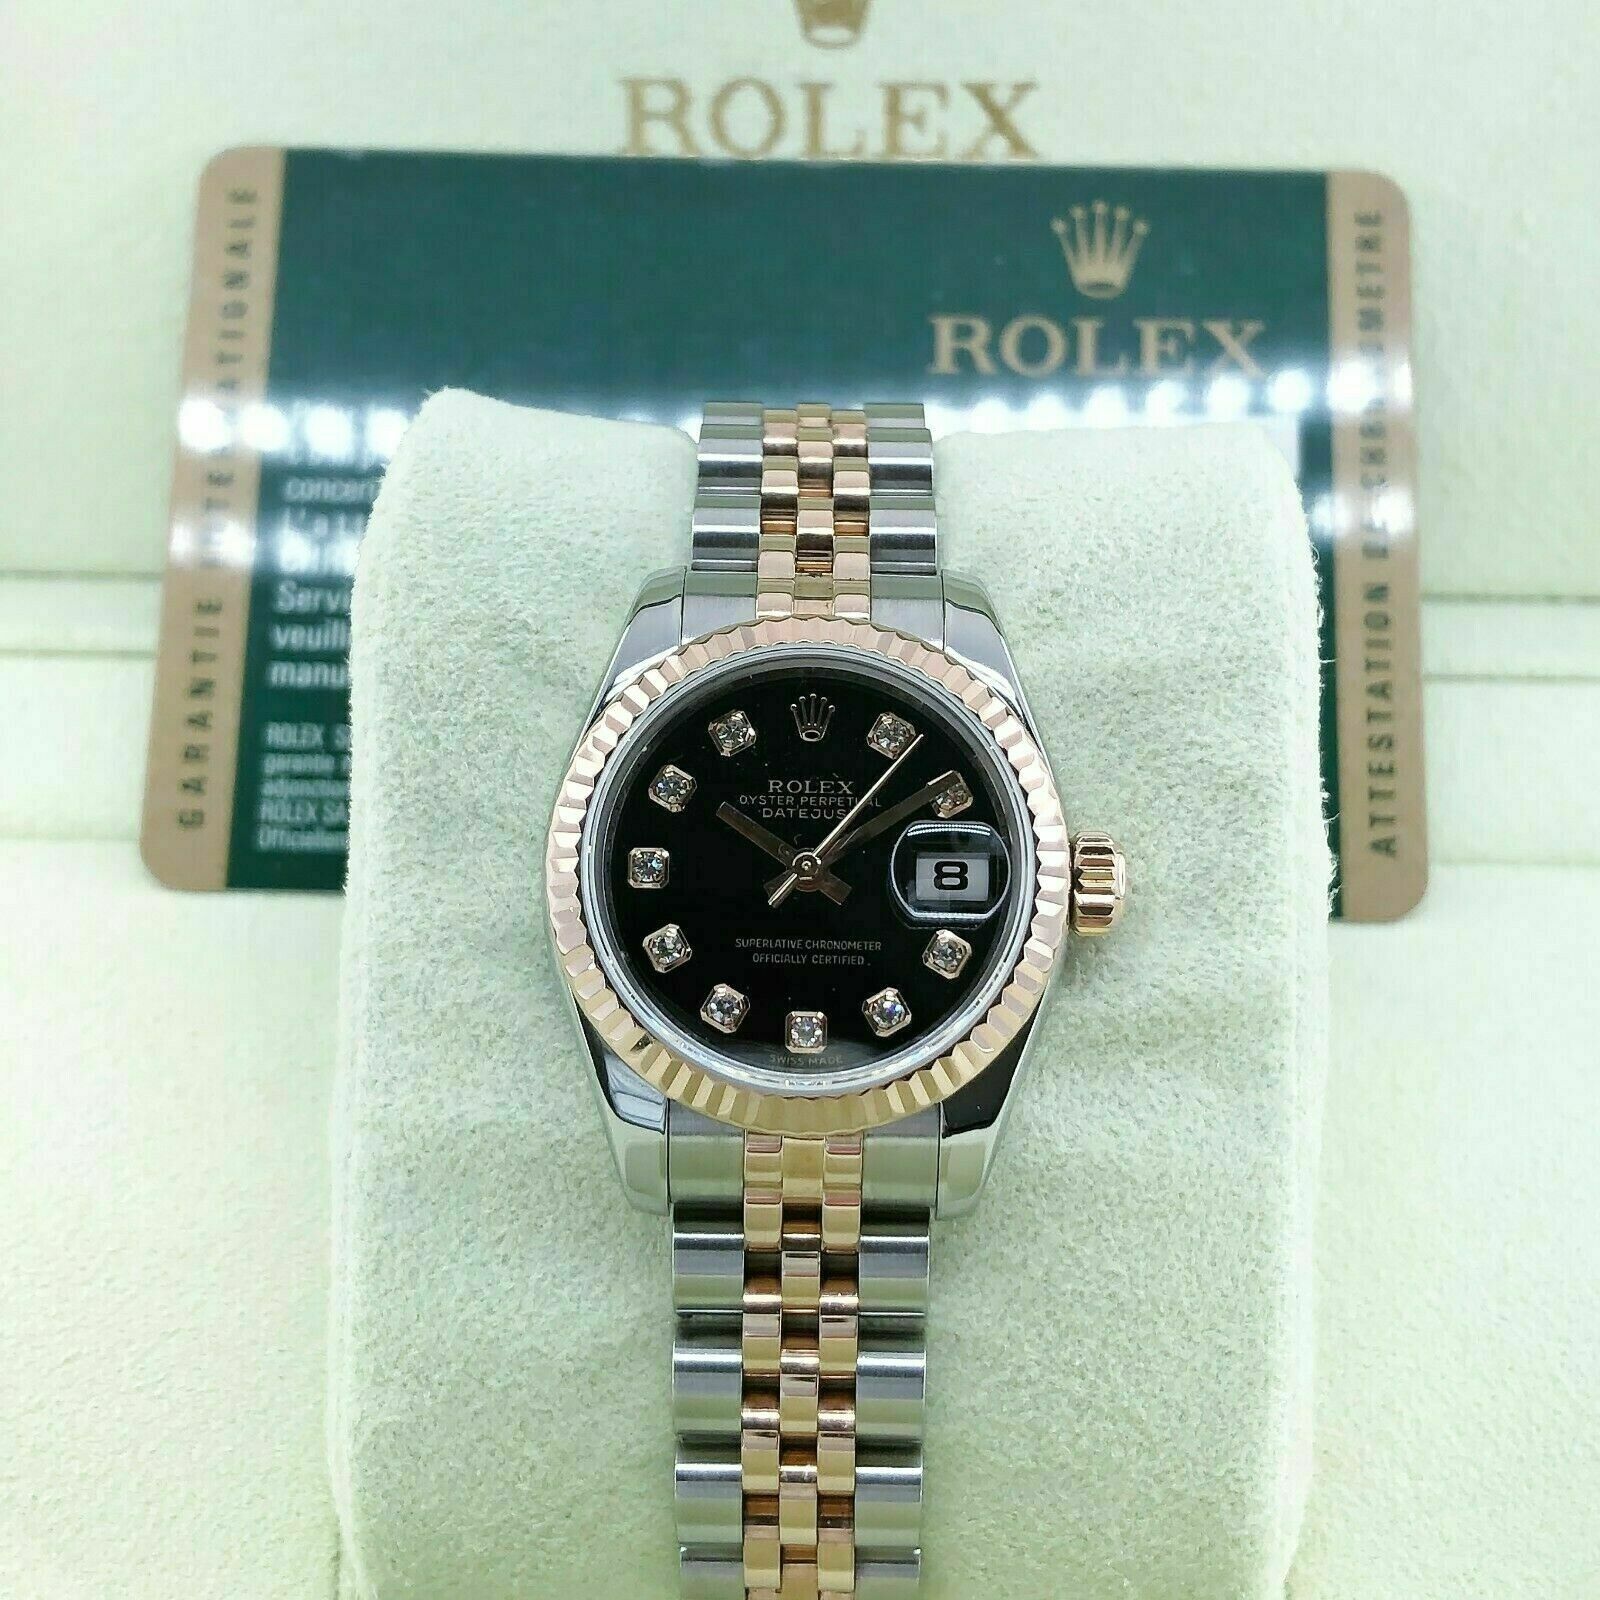 ROLEX LADY DATEJUST 18KY GOLD & STEEL GREEN DIAMOND DIAL FLUTED 26MM WATCH